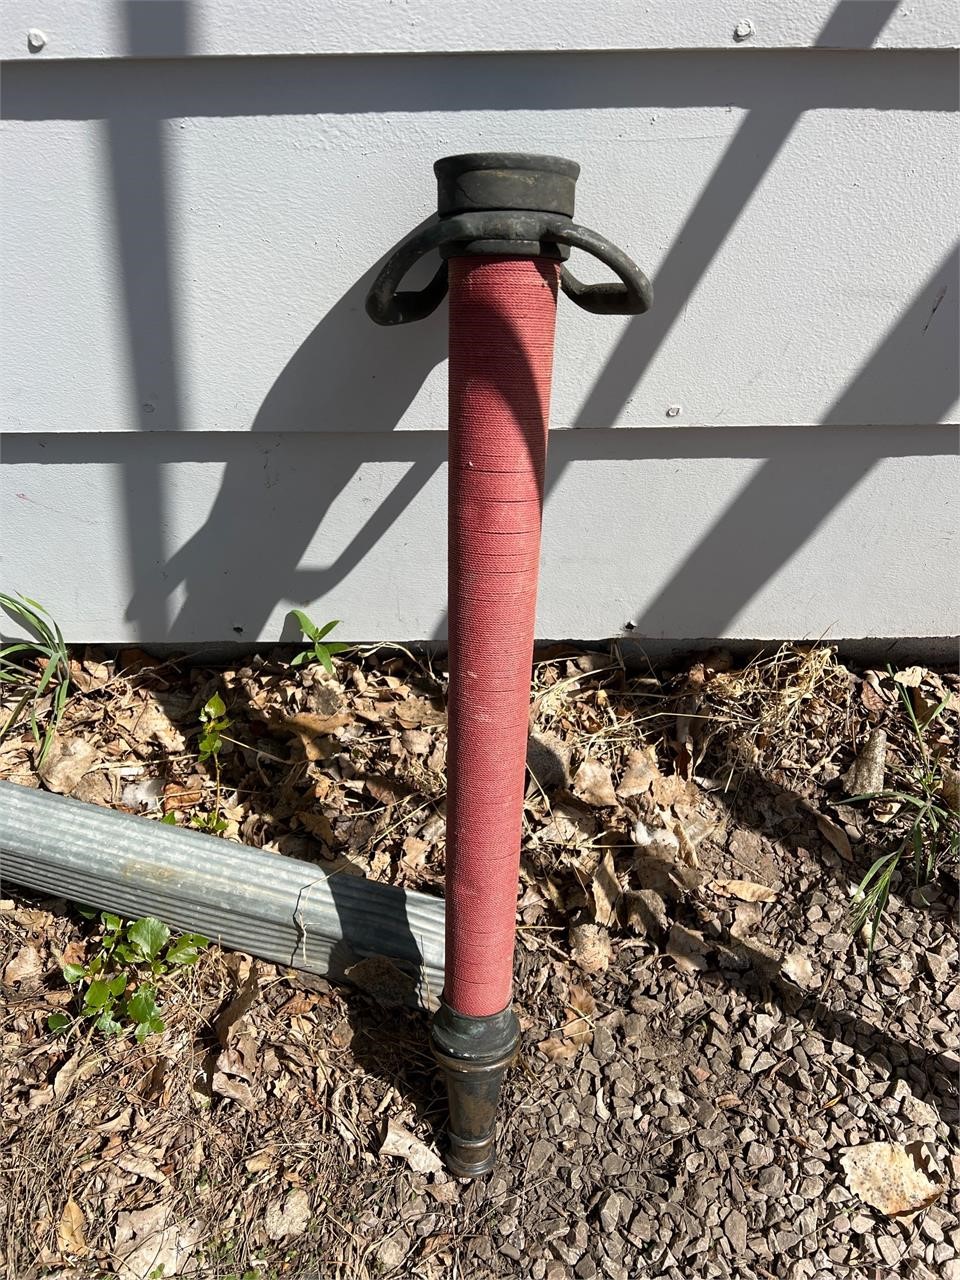 Vintage fire hose and solid brass